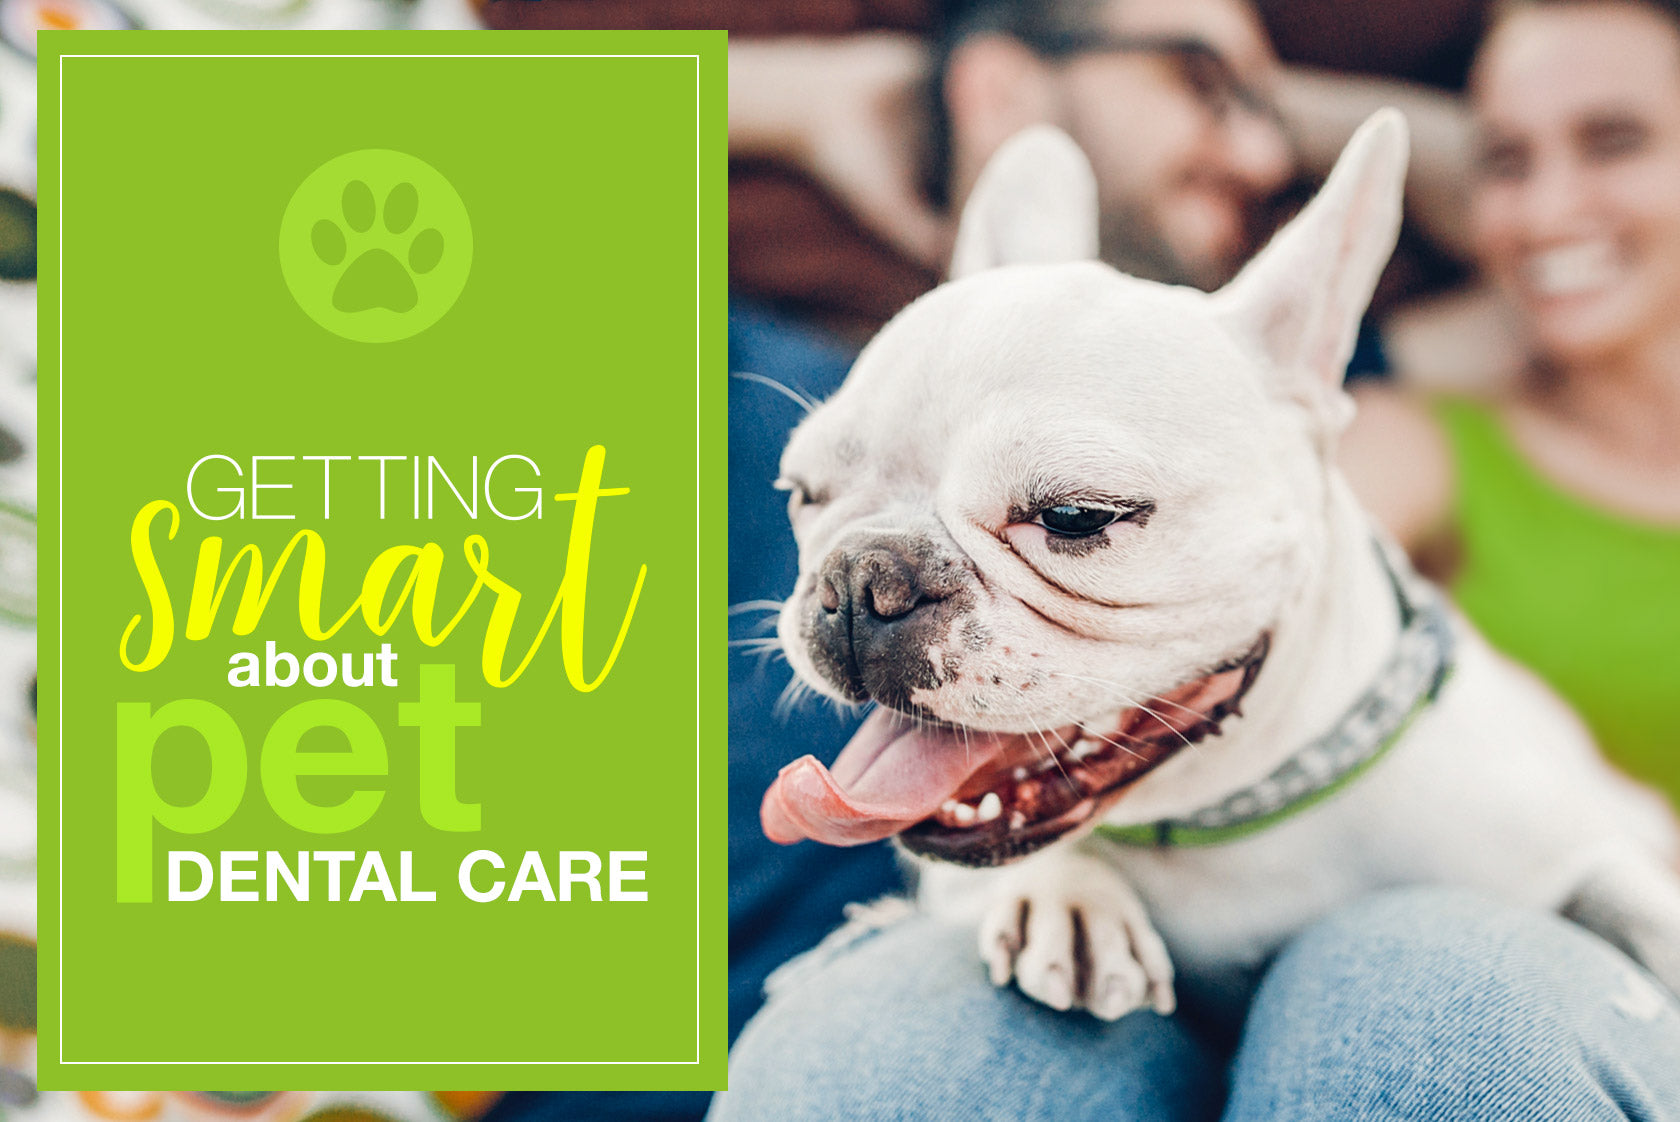 Oxyfresh - Getting smart about pet dental care